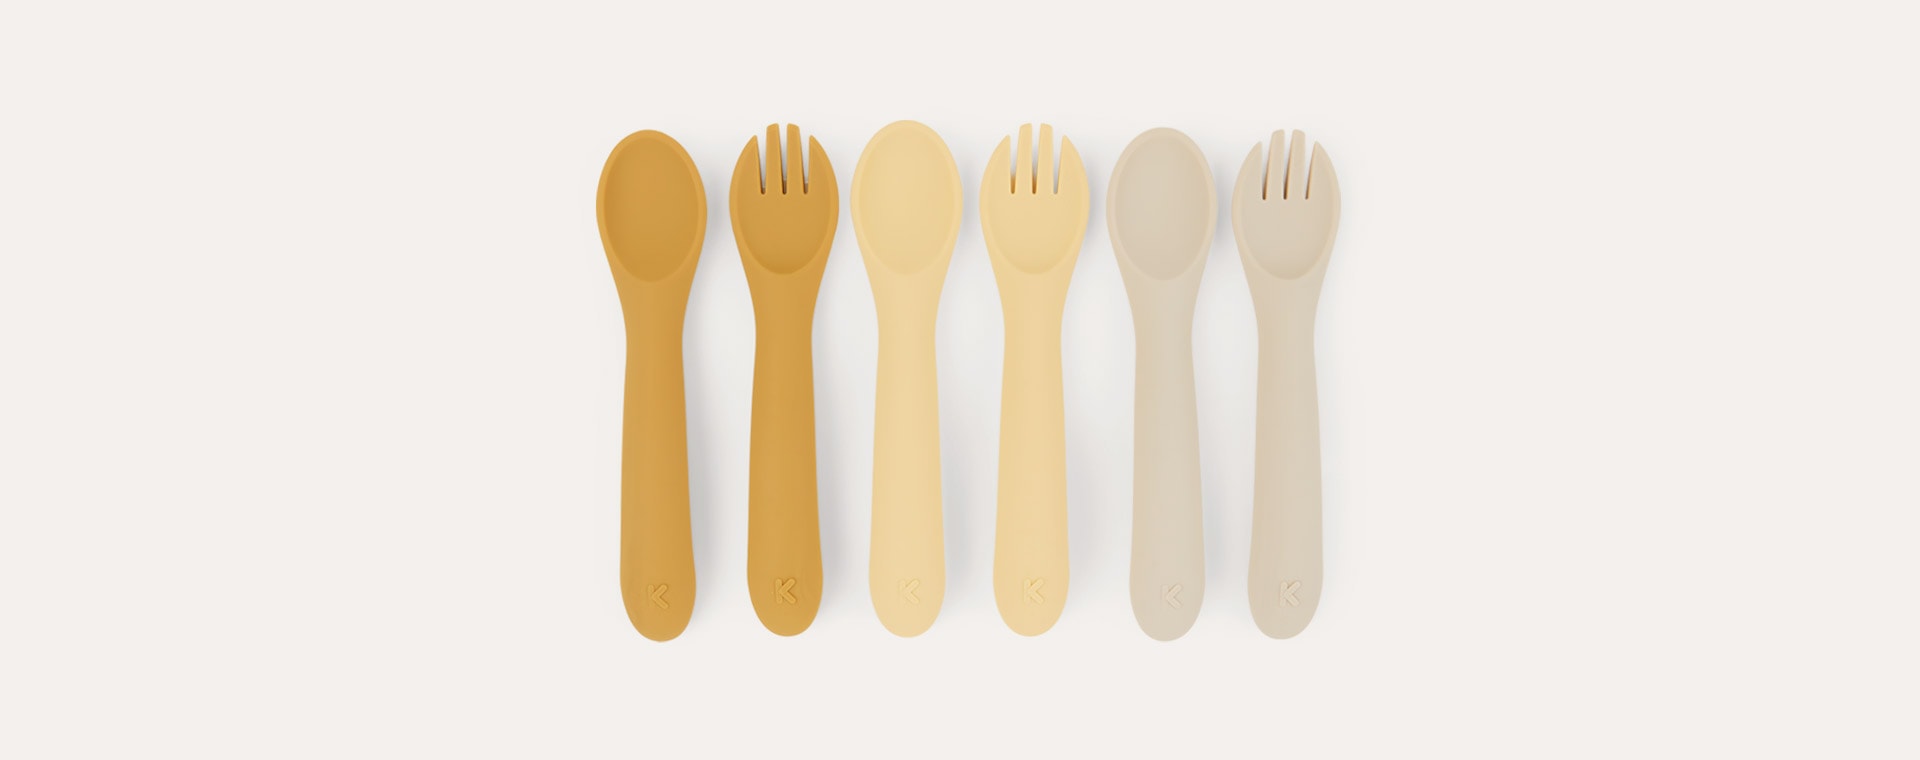 Toffee Mix KIDLY Label 6-Pack Spoons & Forks